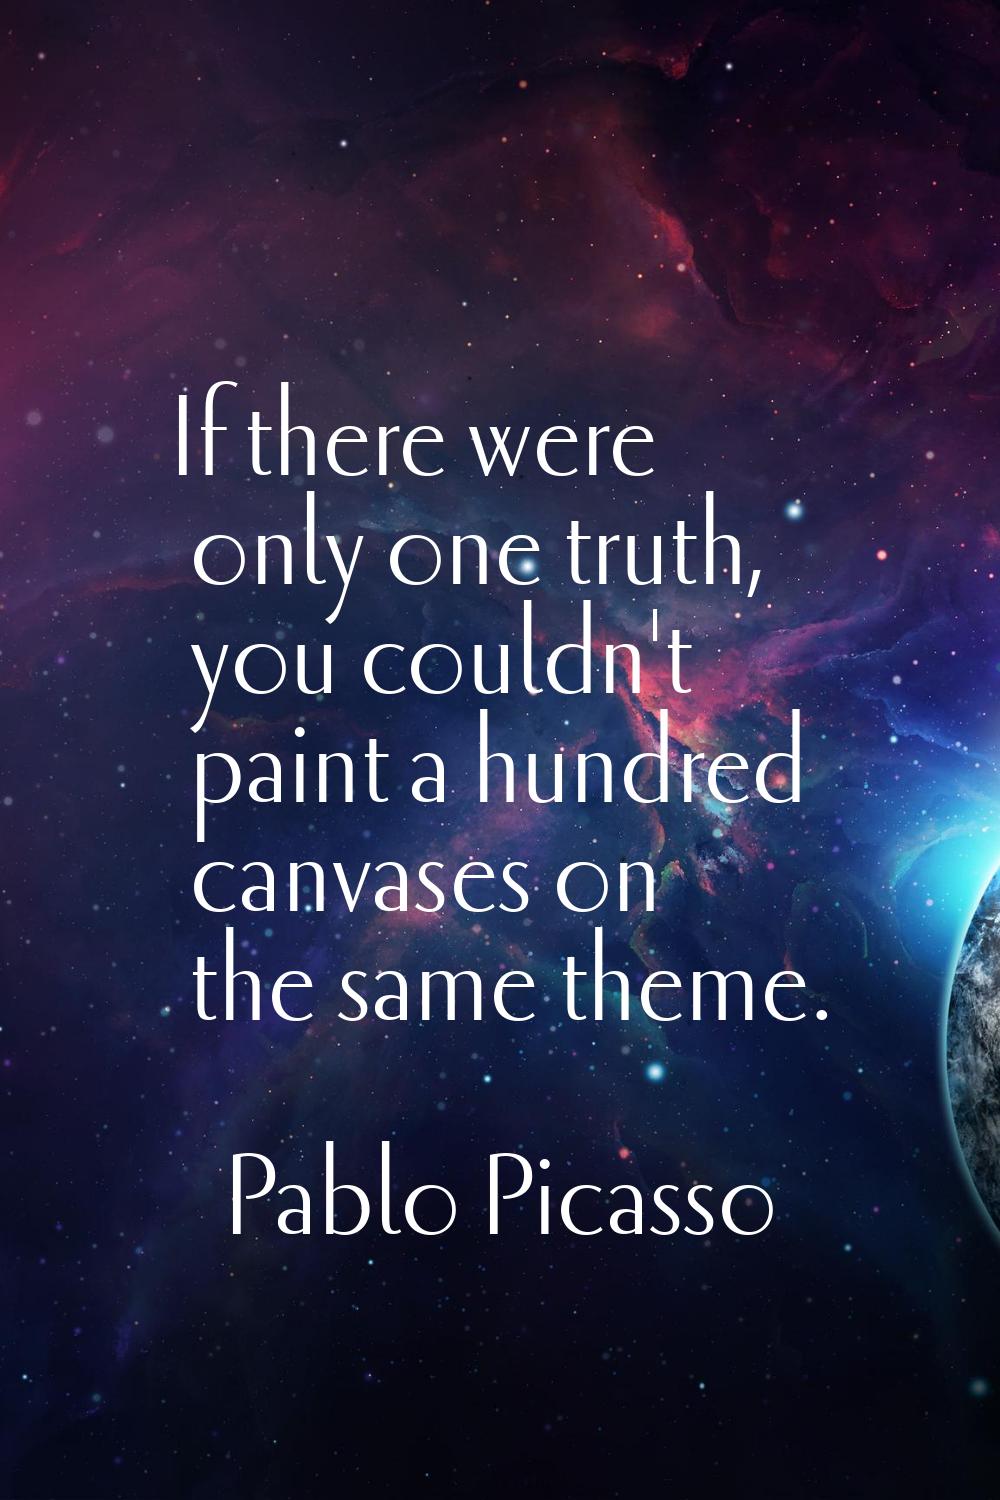 If there were only one truth, you couldn't paint a hundred canvases on the same theme.